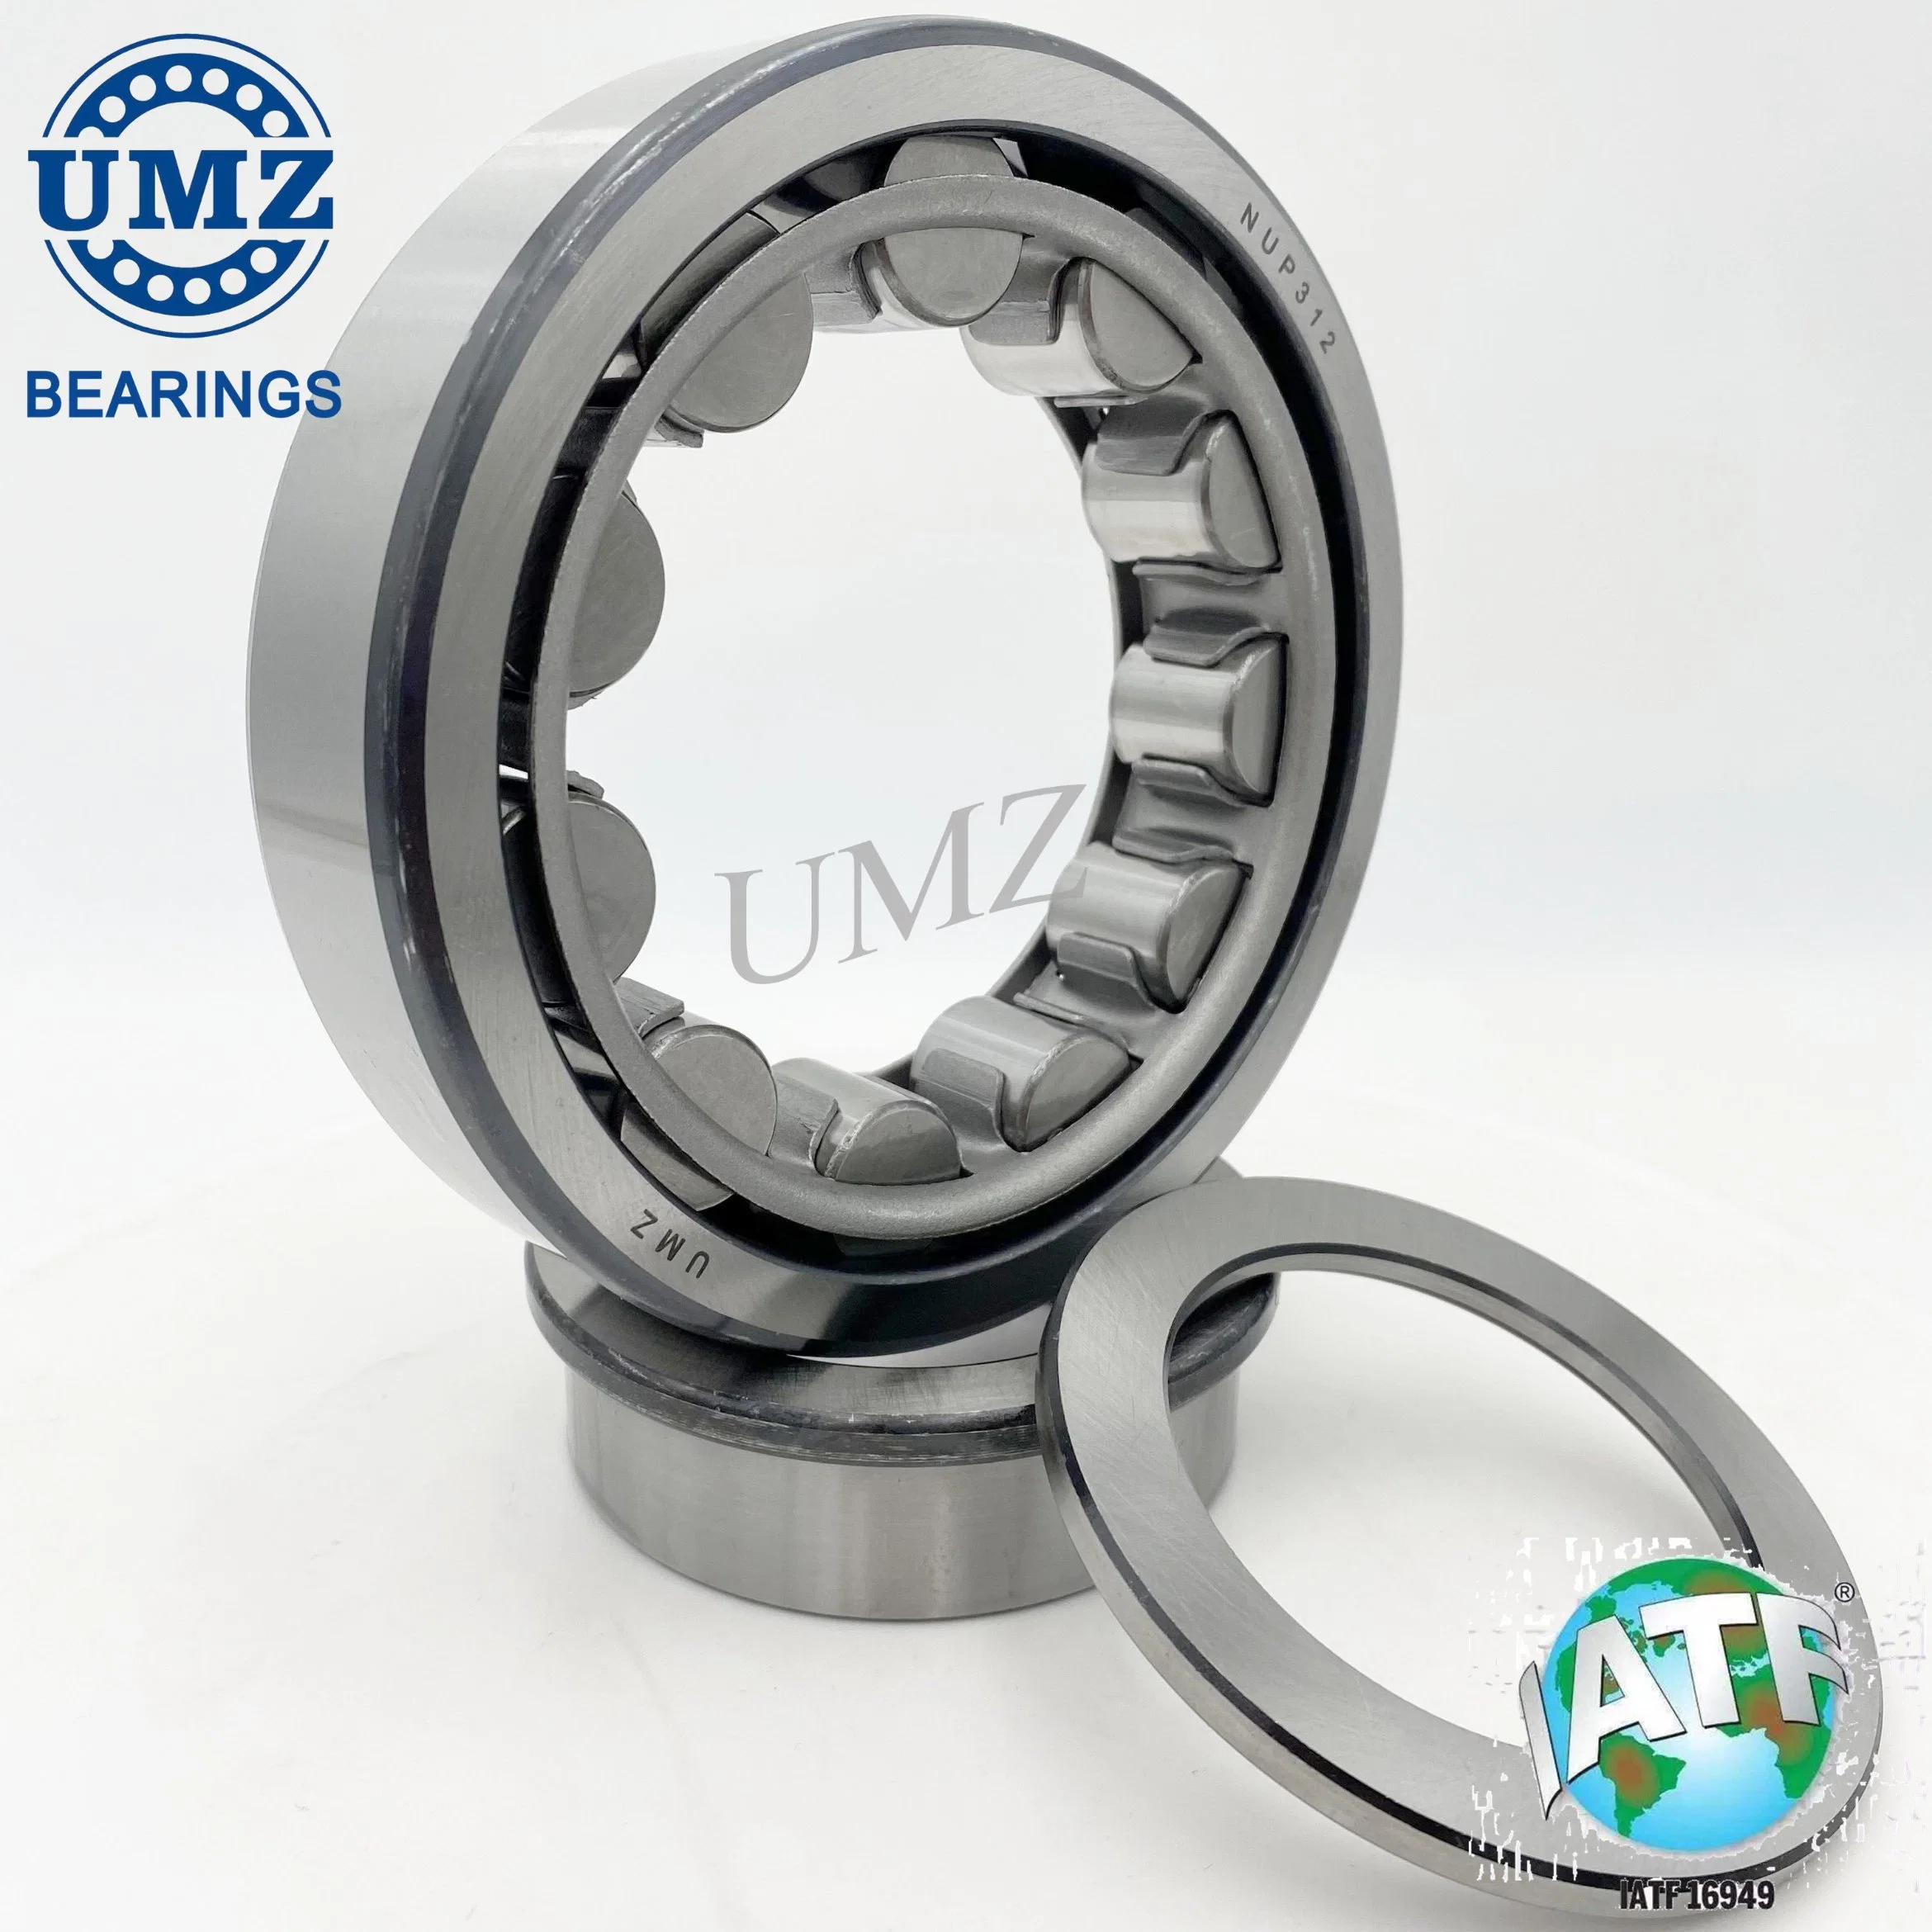 Umz Bearing Factory Nup336 Nup338 Nup340 Cylindrical Roller Bearing